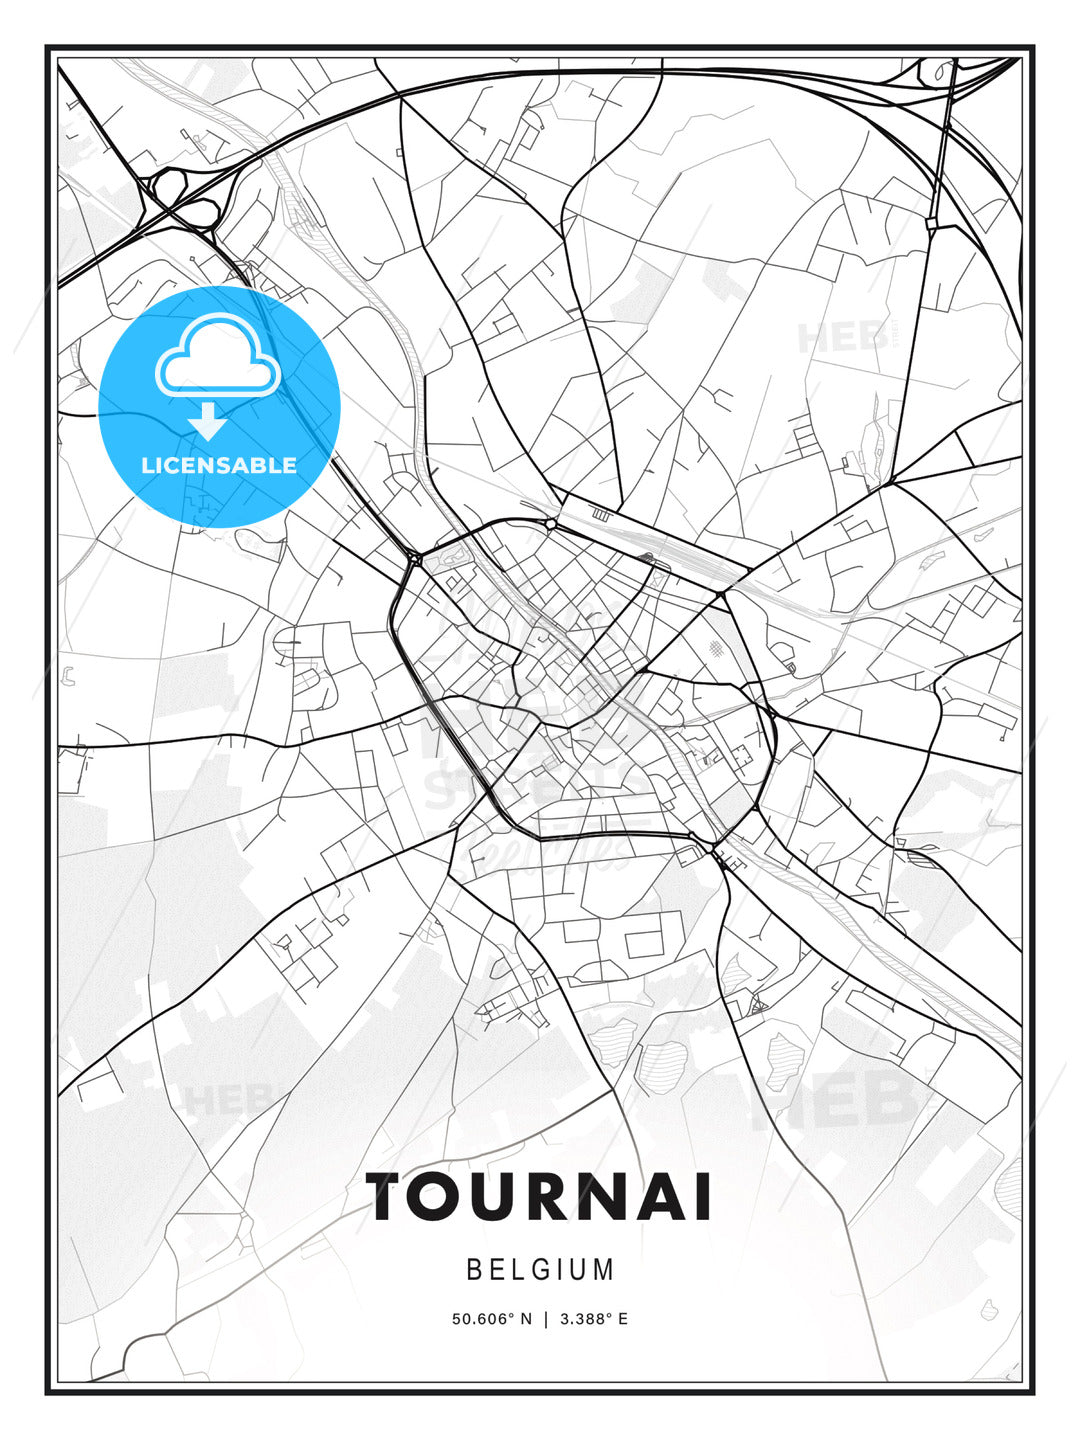 Tournai, Belgium, Modern Print Template in Various Formats - HEBSTREITS Sketches